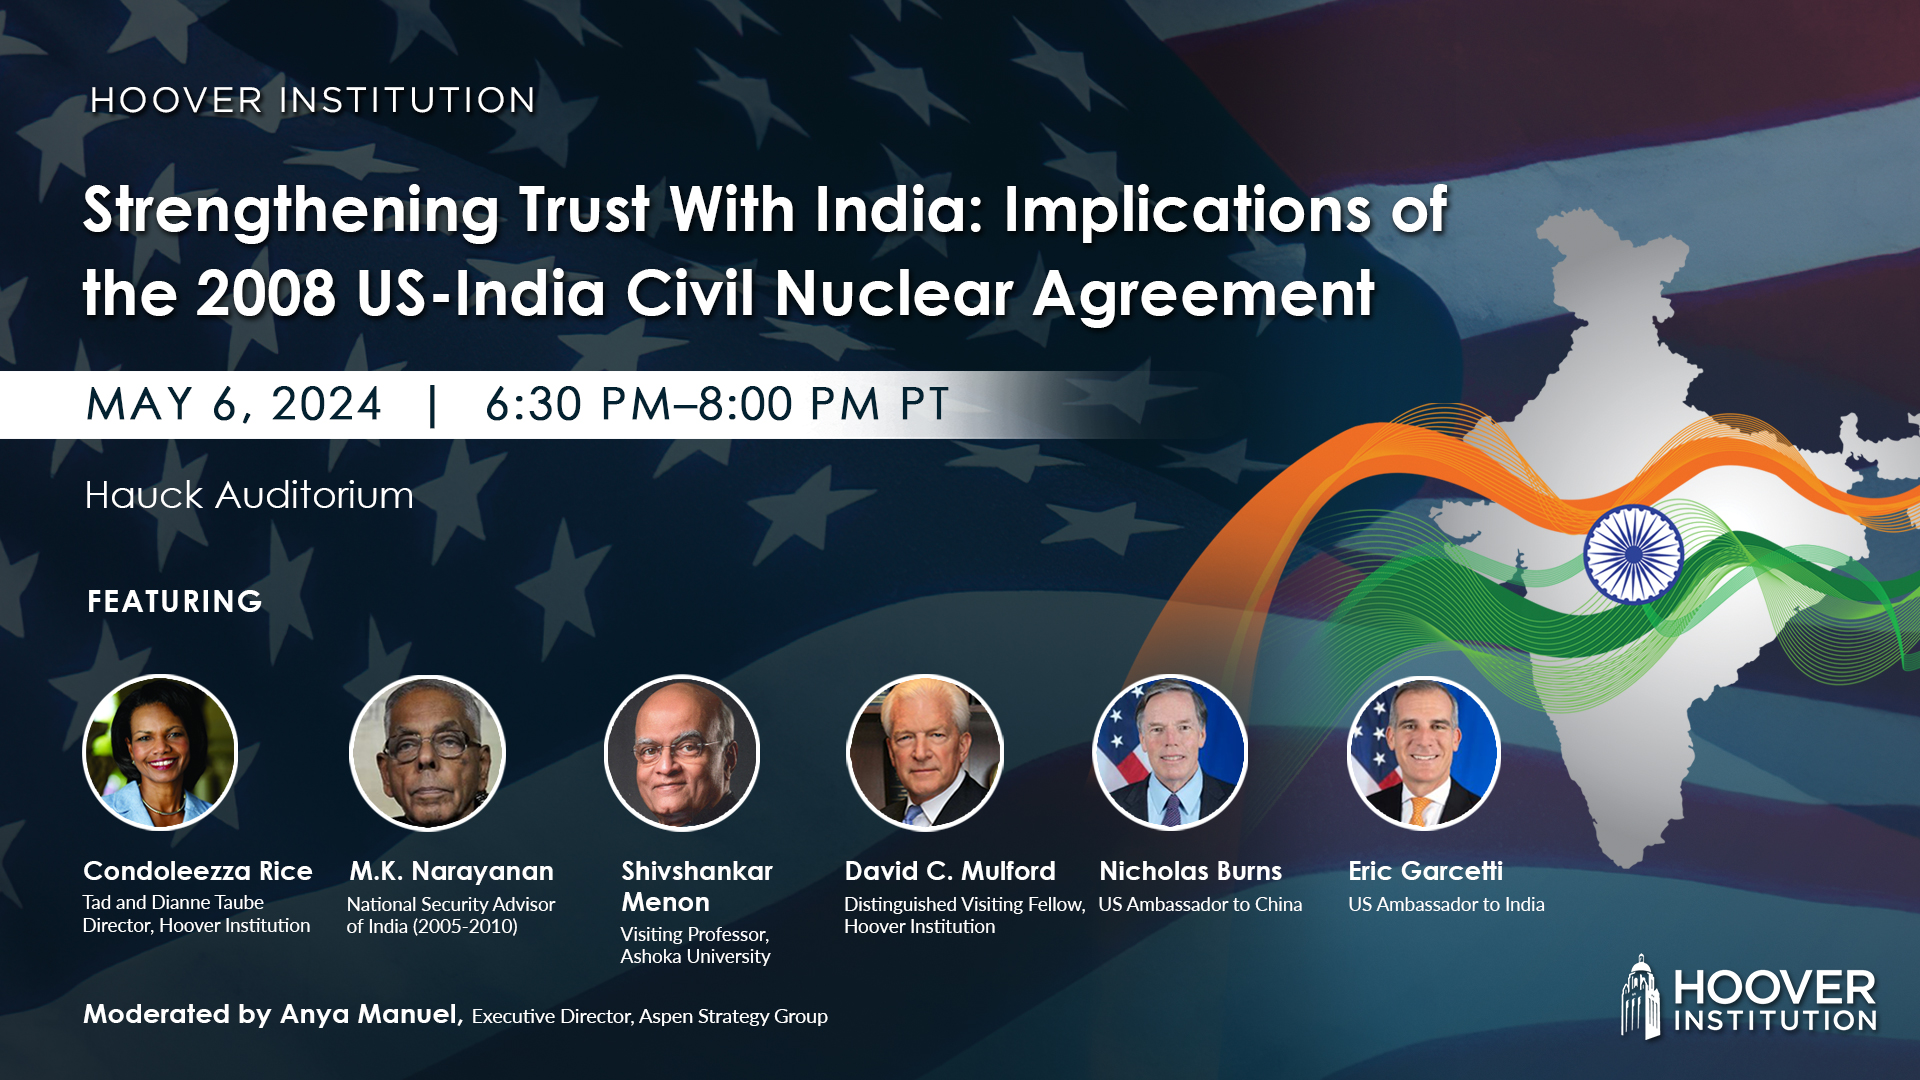 Strengthening Trust With India: Implications of the 2008 US-India Civil Nuclear Agreement